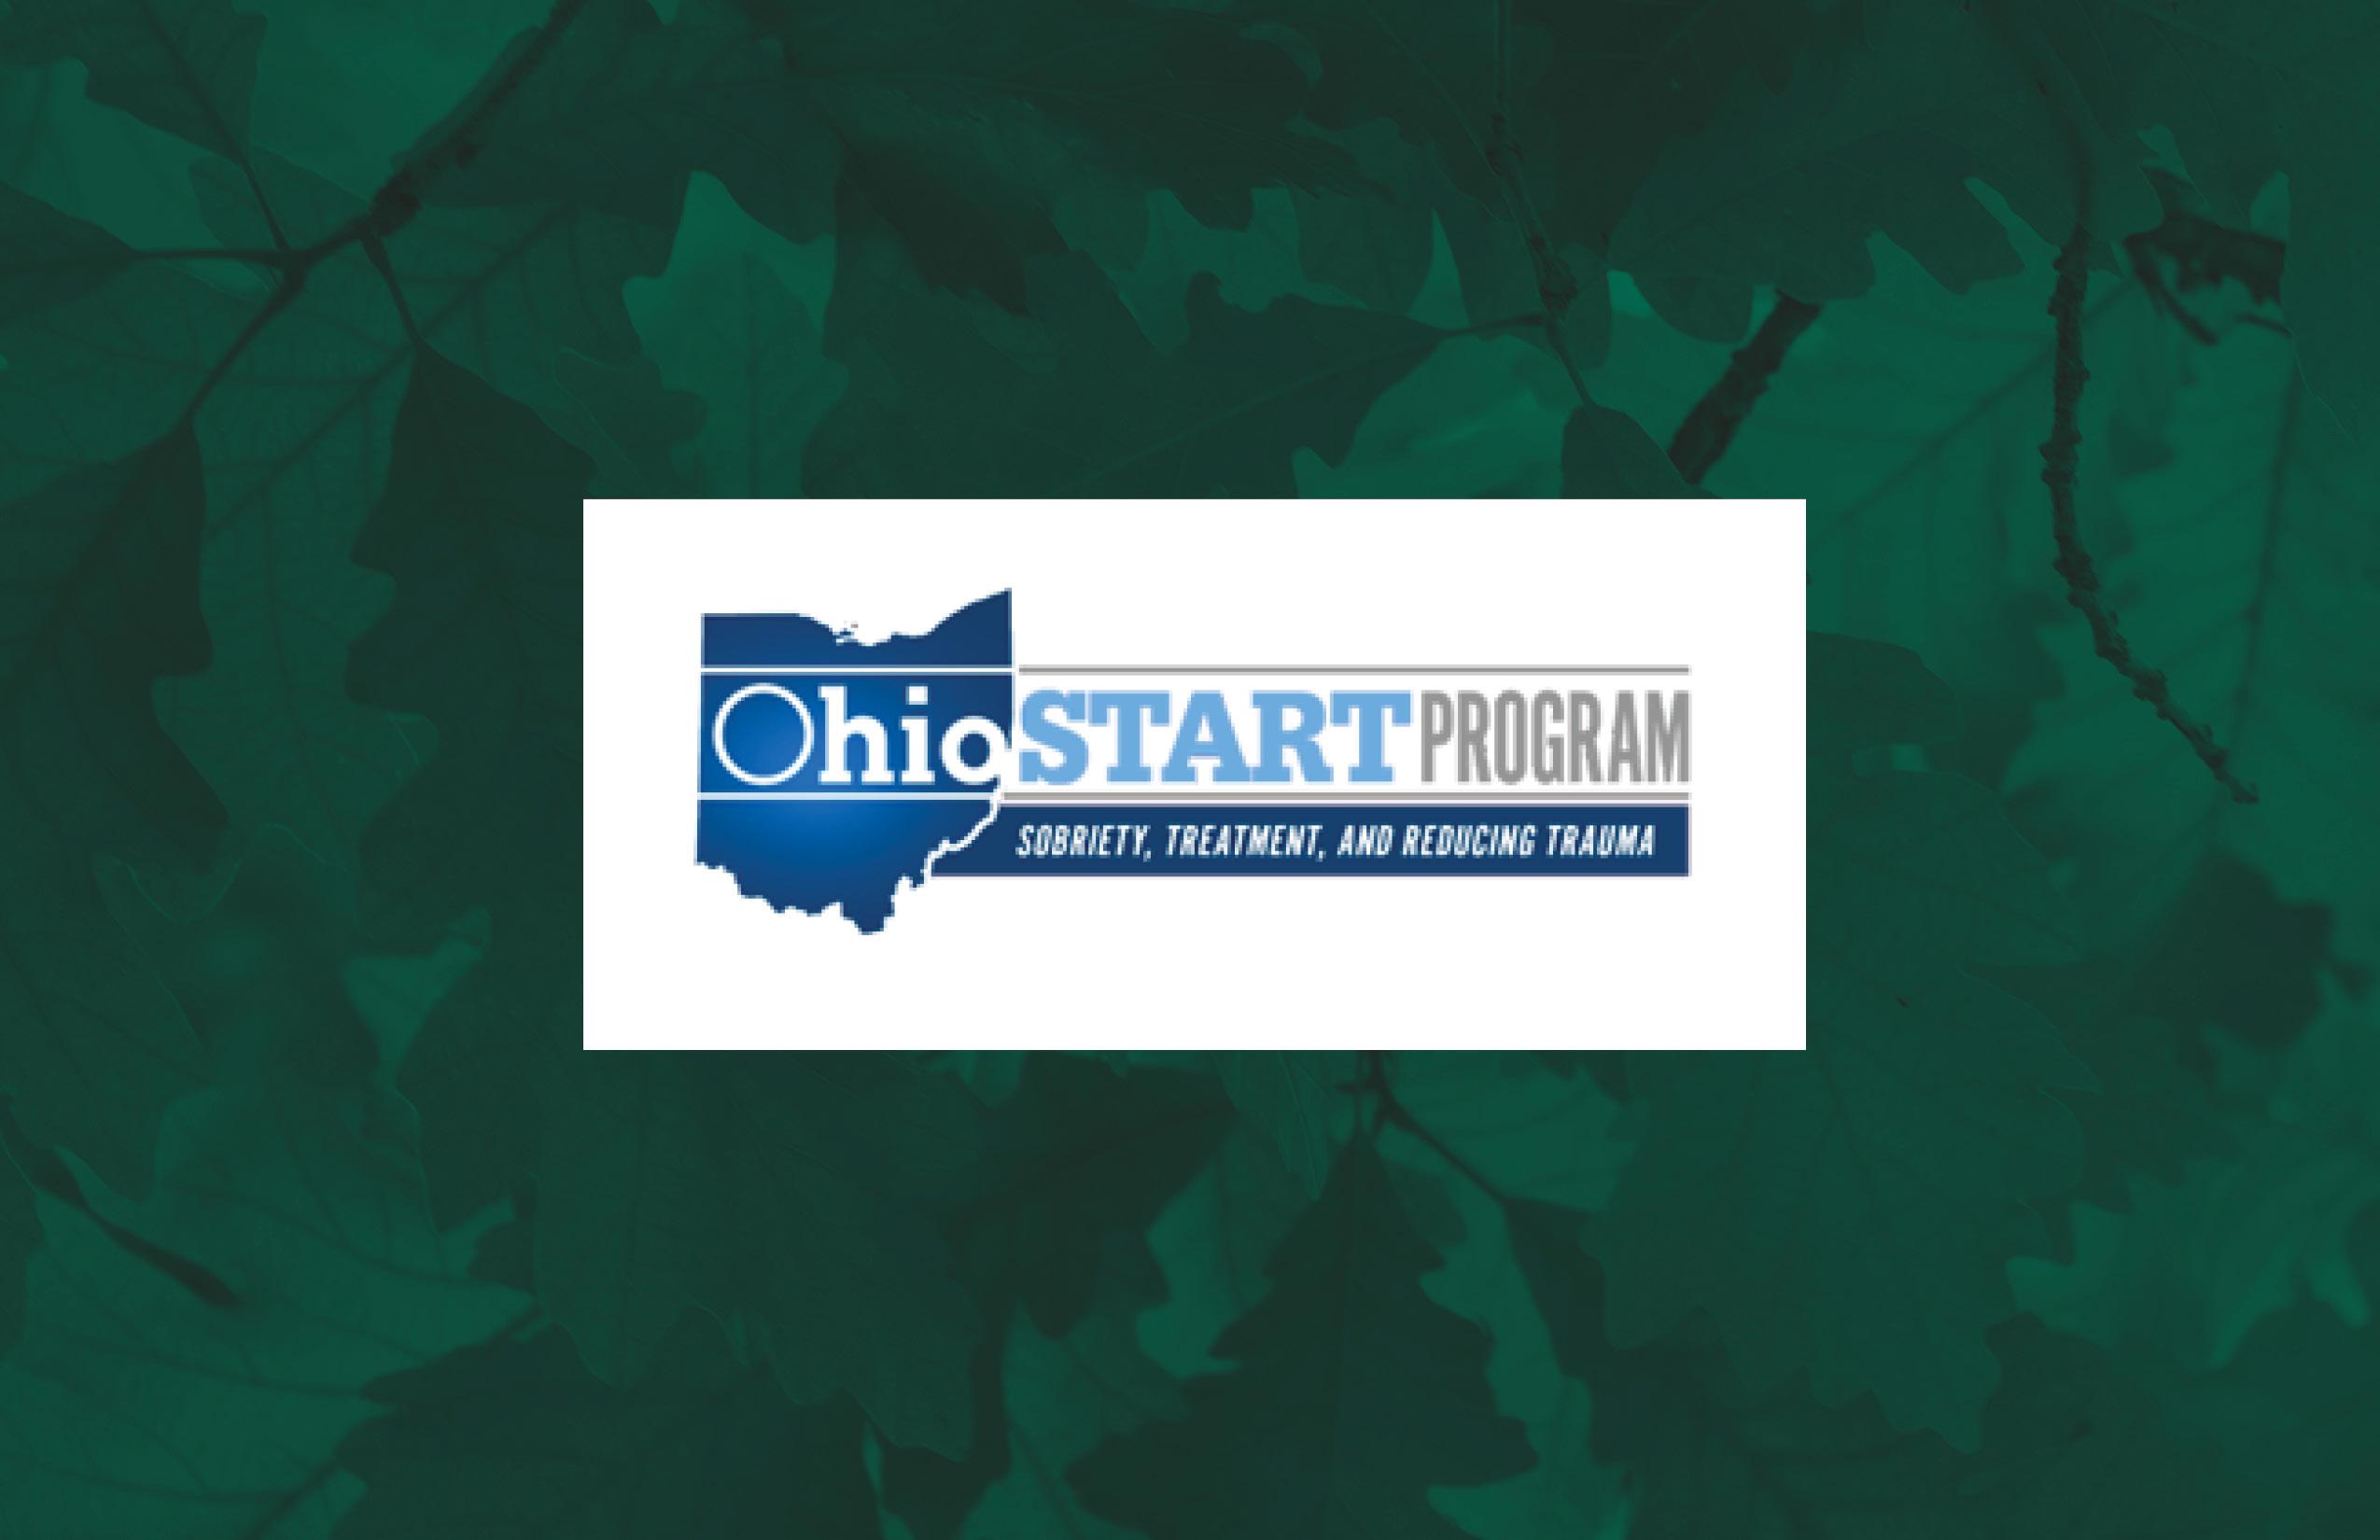 Ohio Start Program Logo in a white square on a background of texture of green leaves